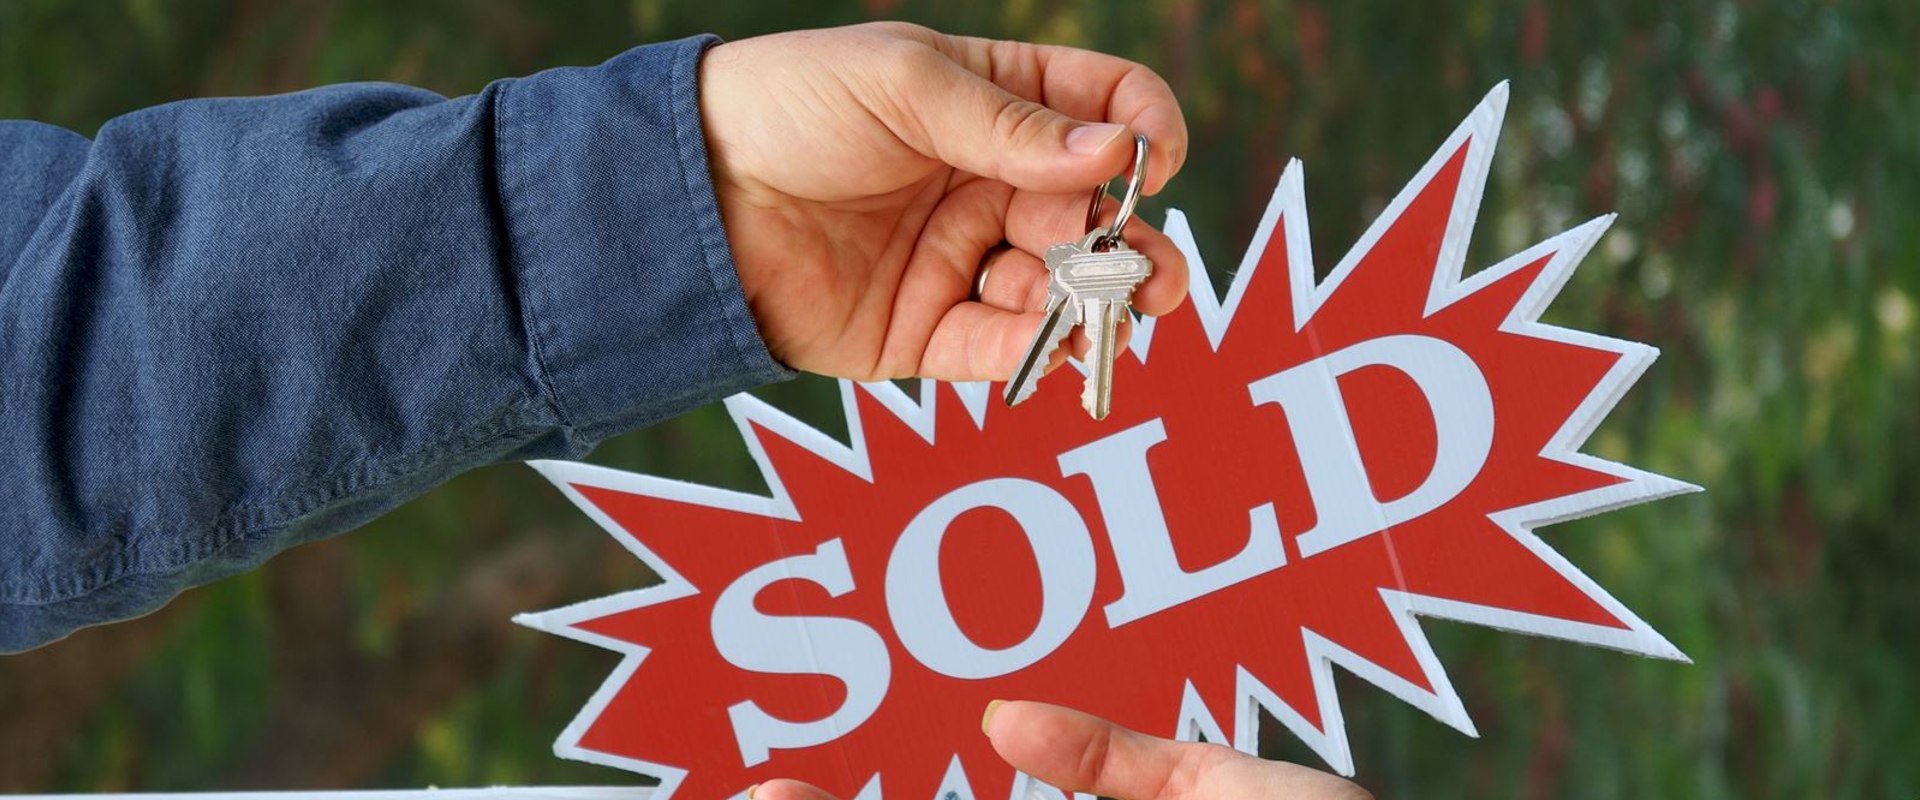 How long after buying a house can i sell it?